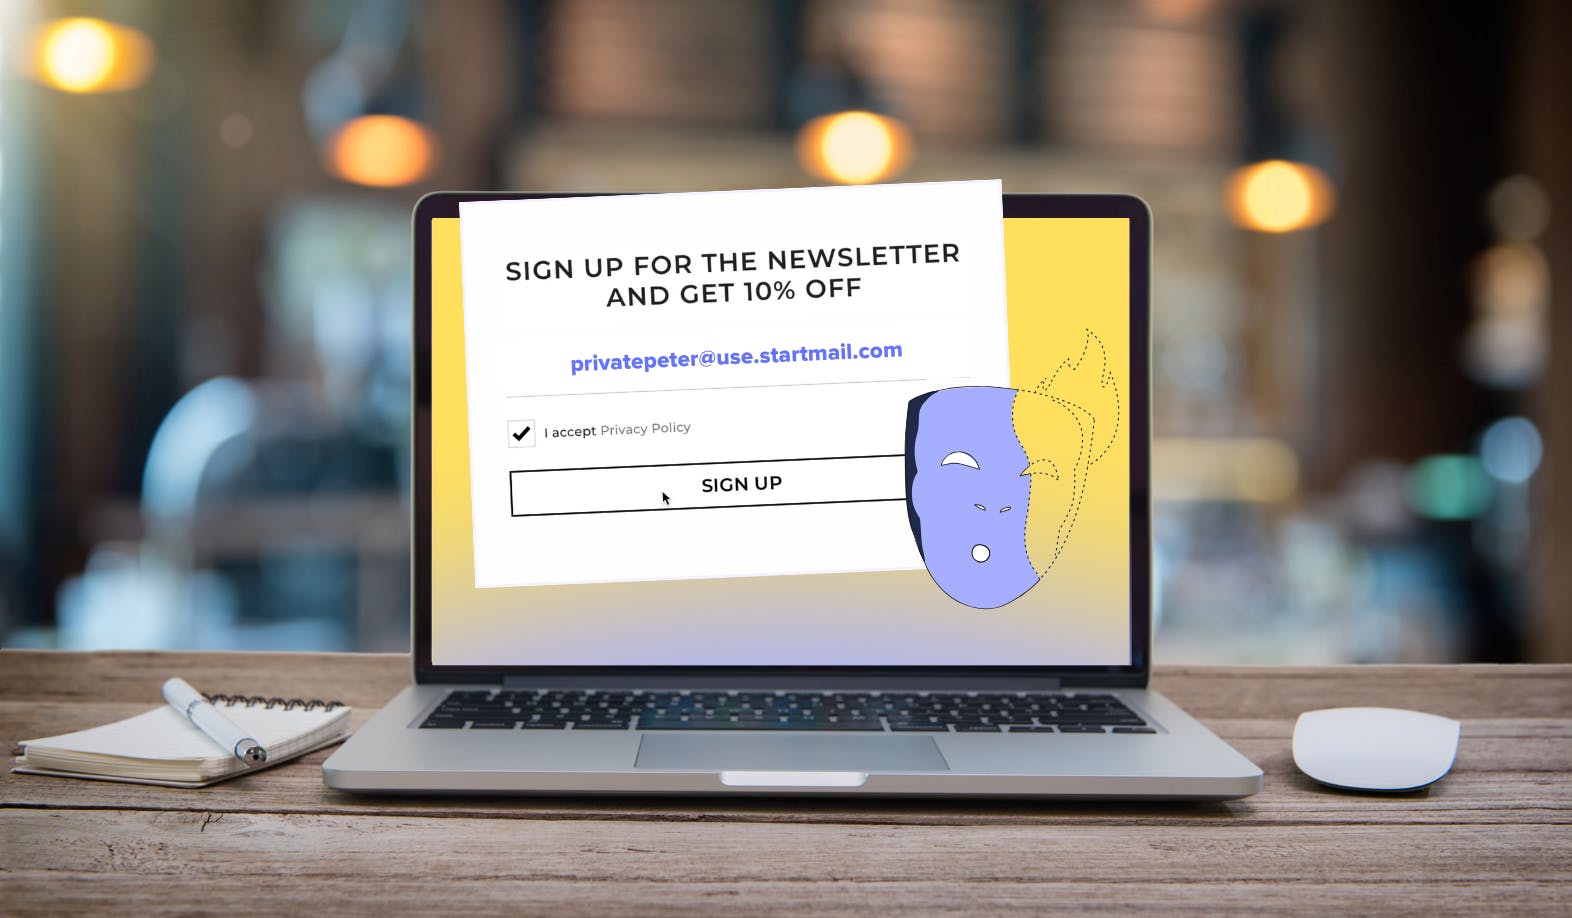 The image shows a laptop. On the screen you see a newsletter sign up form that promises a 10% discount if an email address is shared. On top of the sign up form you see a StartMail illustration of an email alias mask.